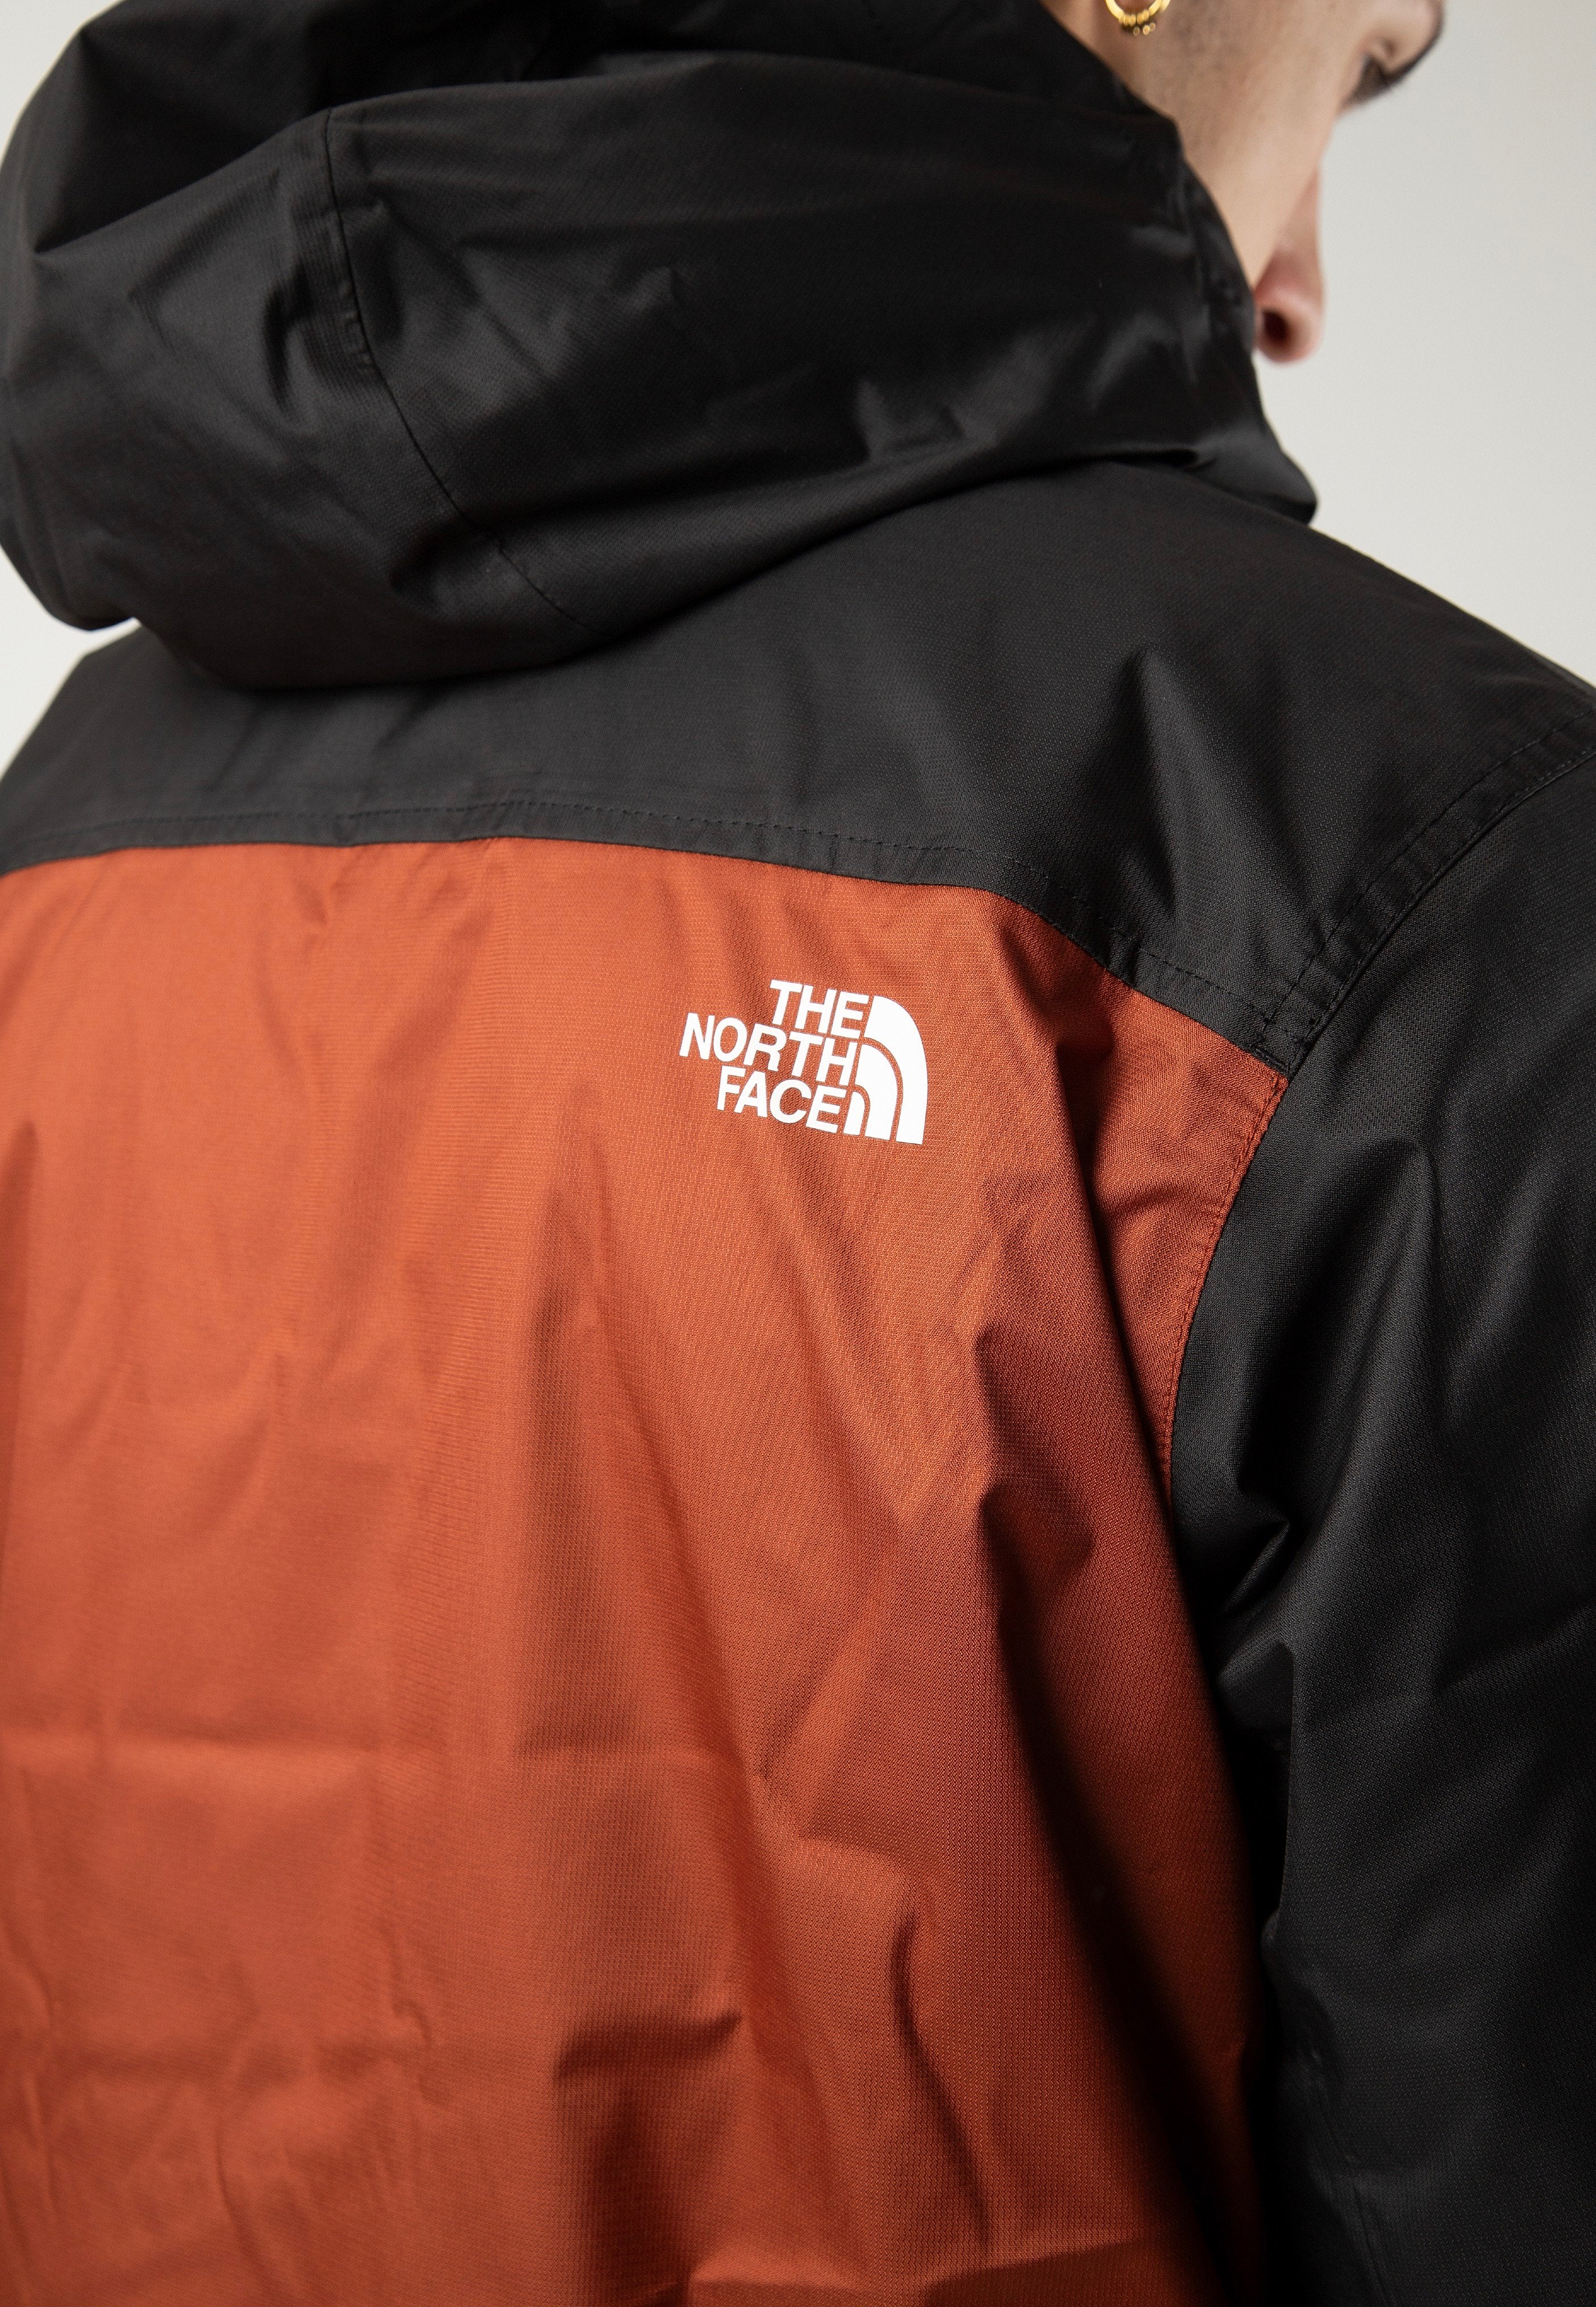 The North Face - Millerton Insulated Brandybn/Tnf Black - Jacket